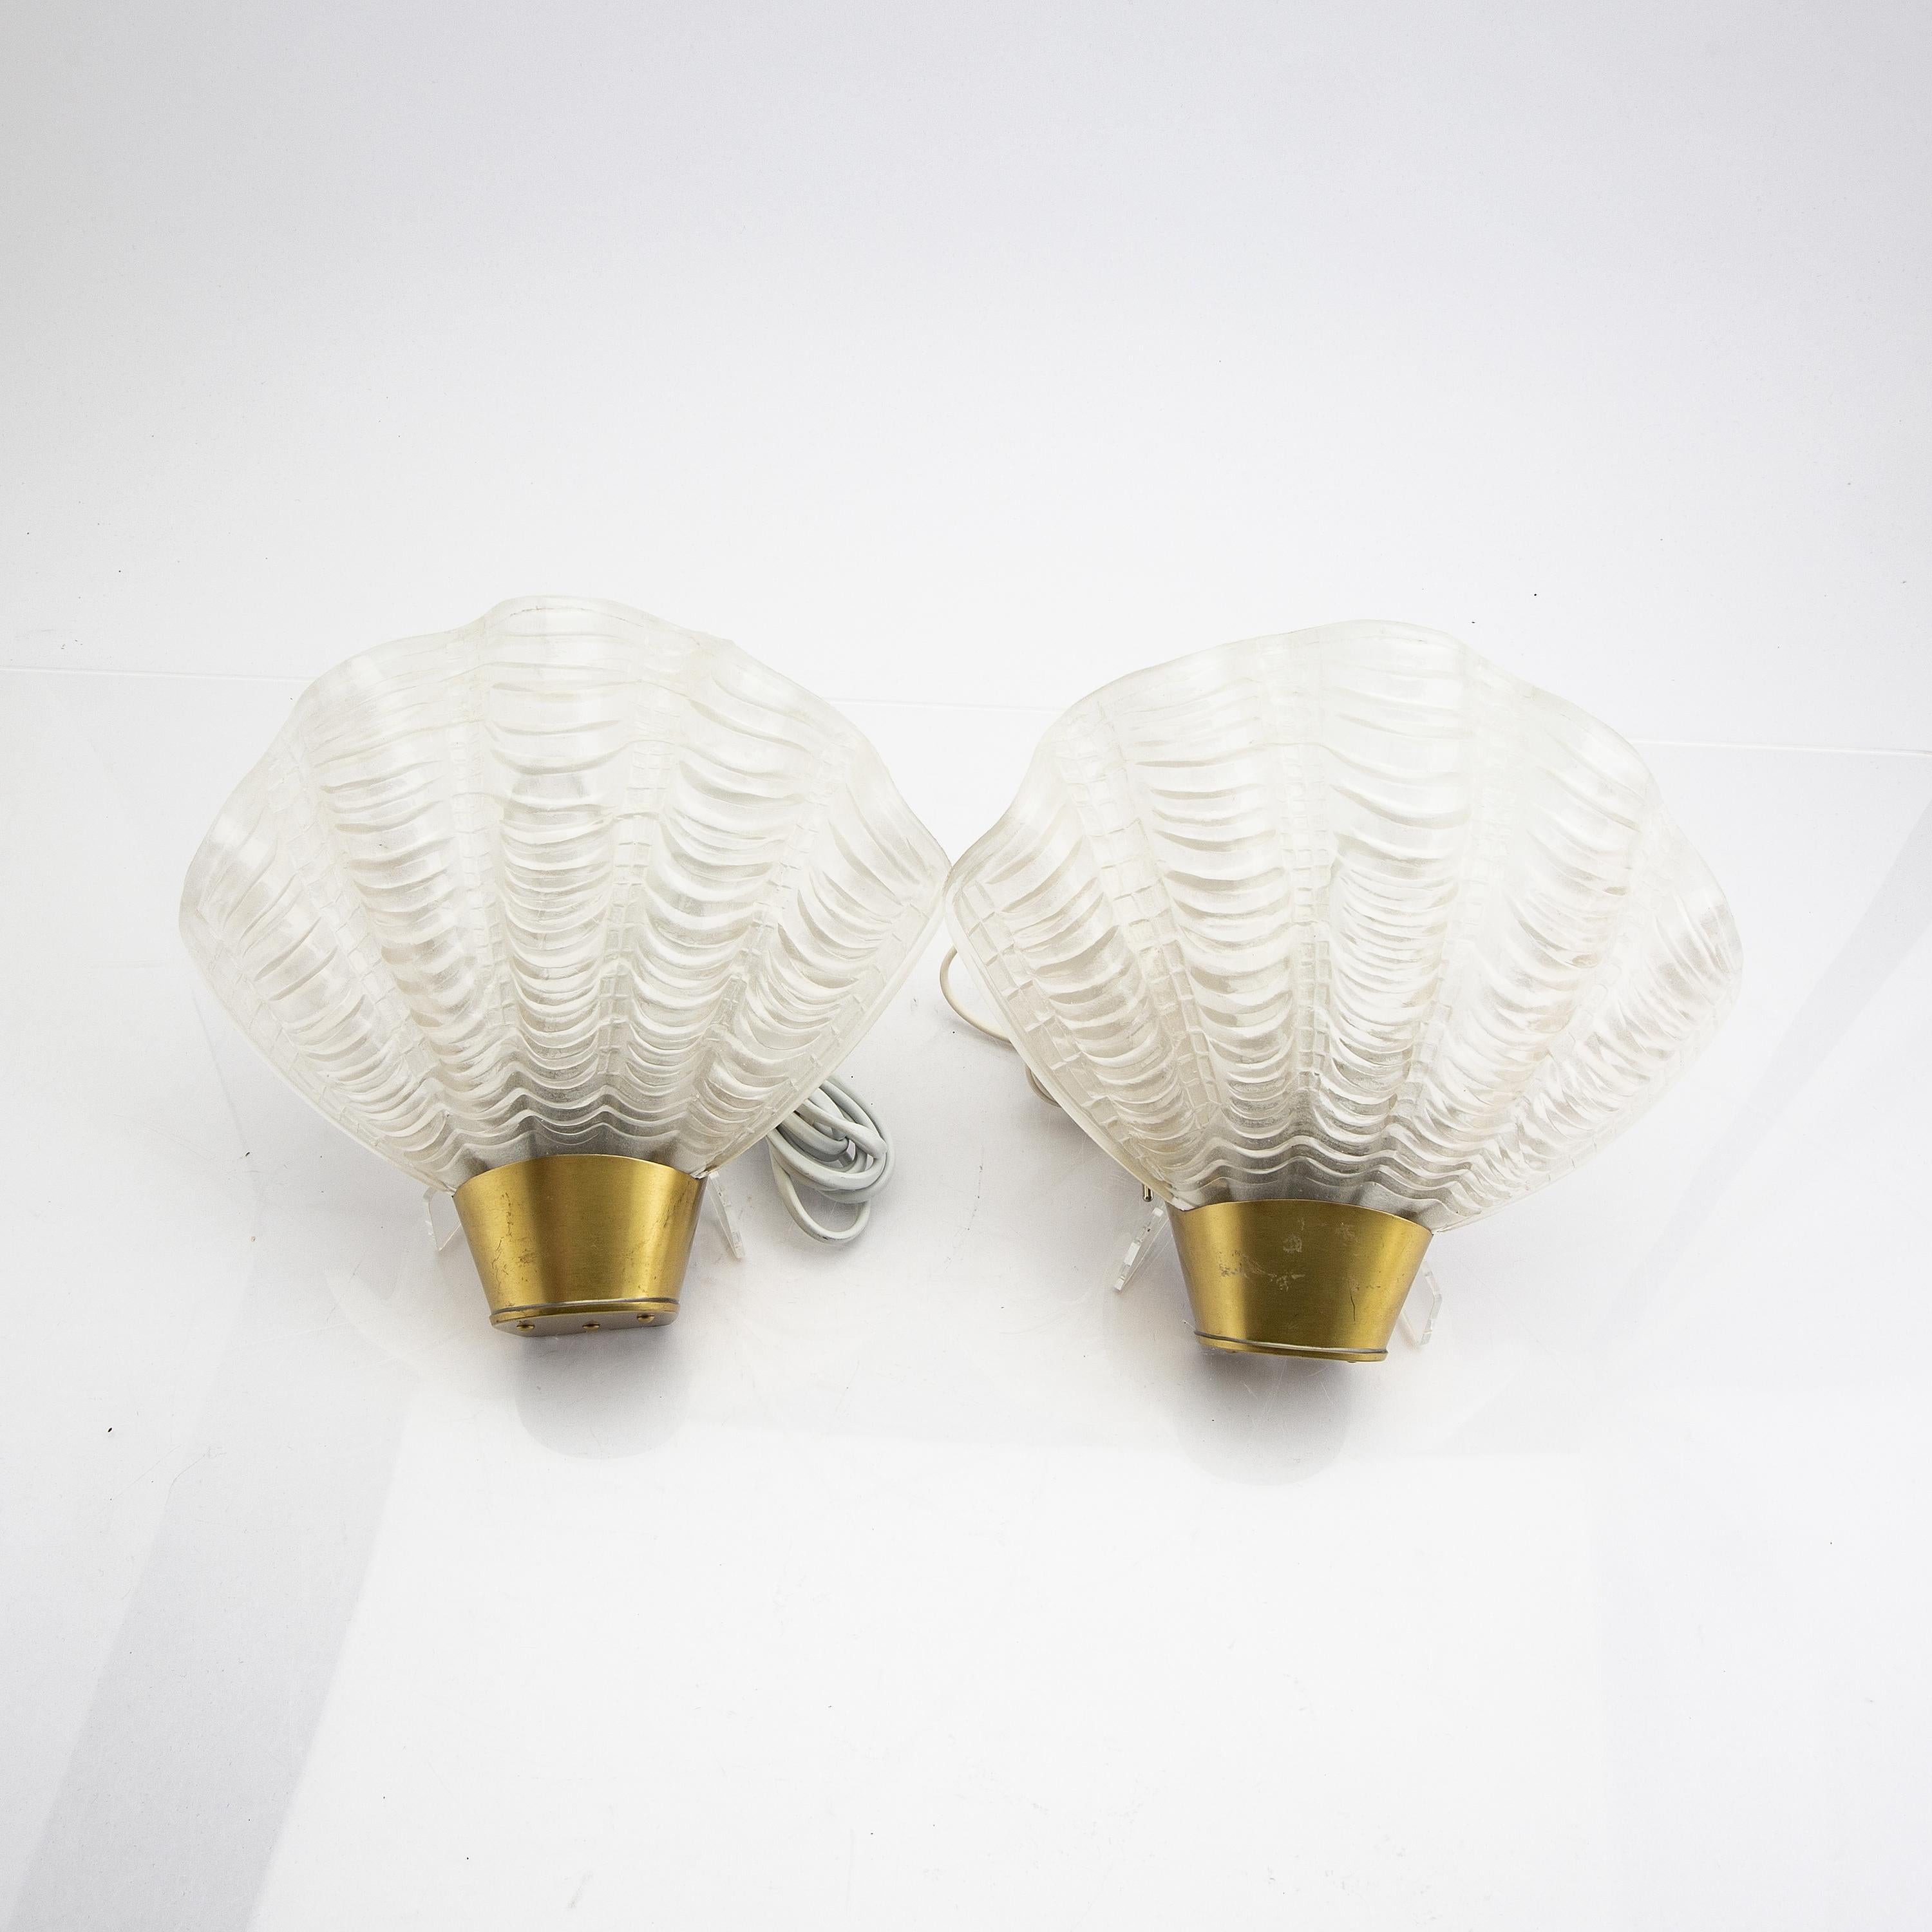 Shell Shaped Wall Sconces, Model Coquille, from ASEA, 1940s, Set of Two
Good condition.
 